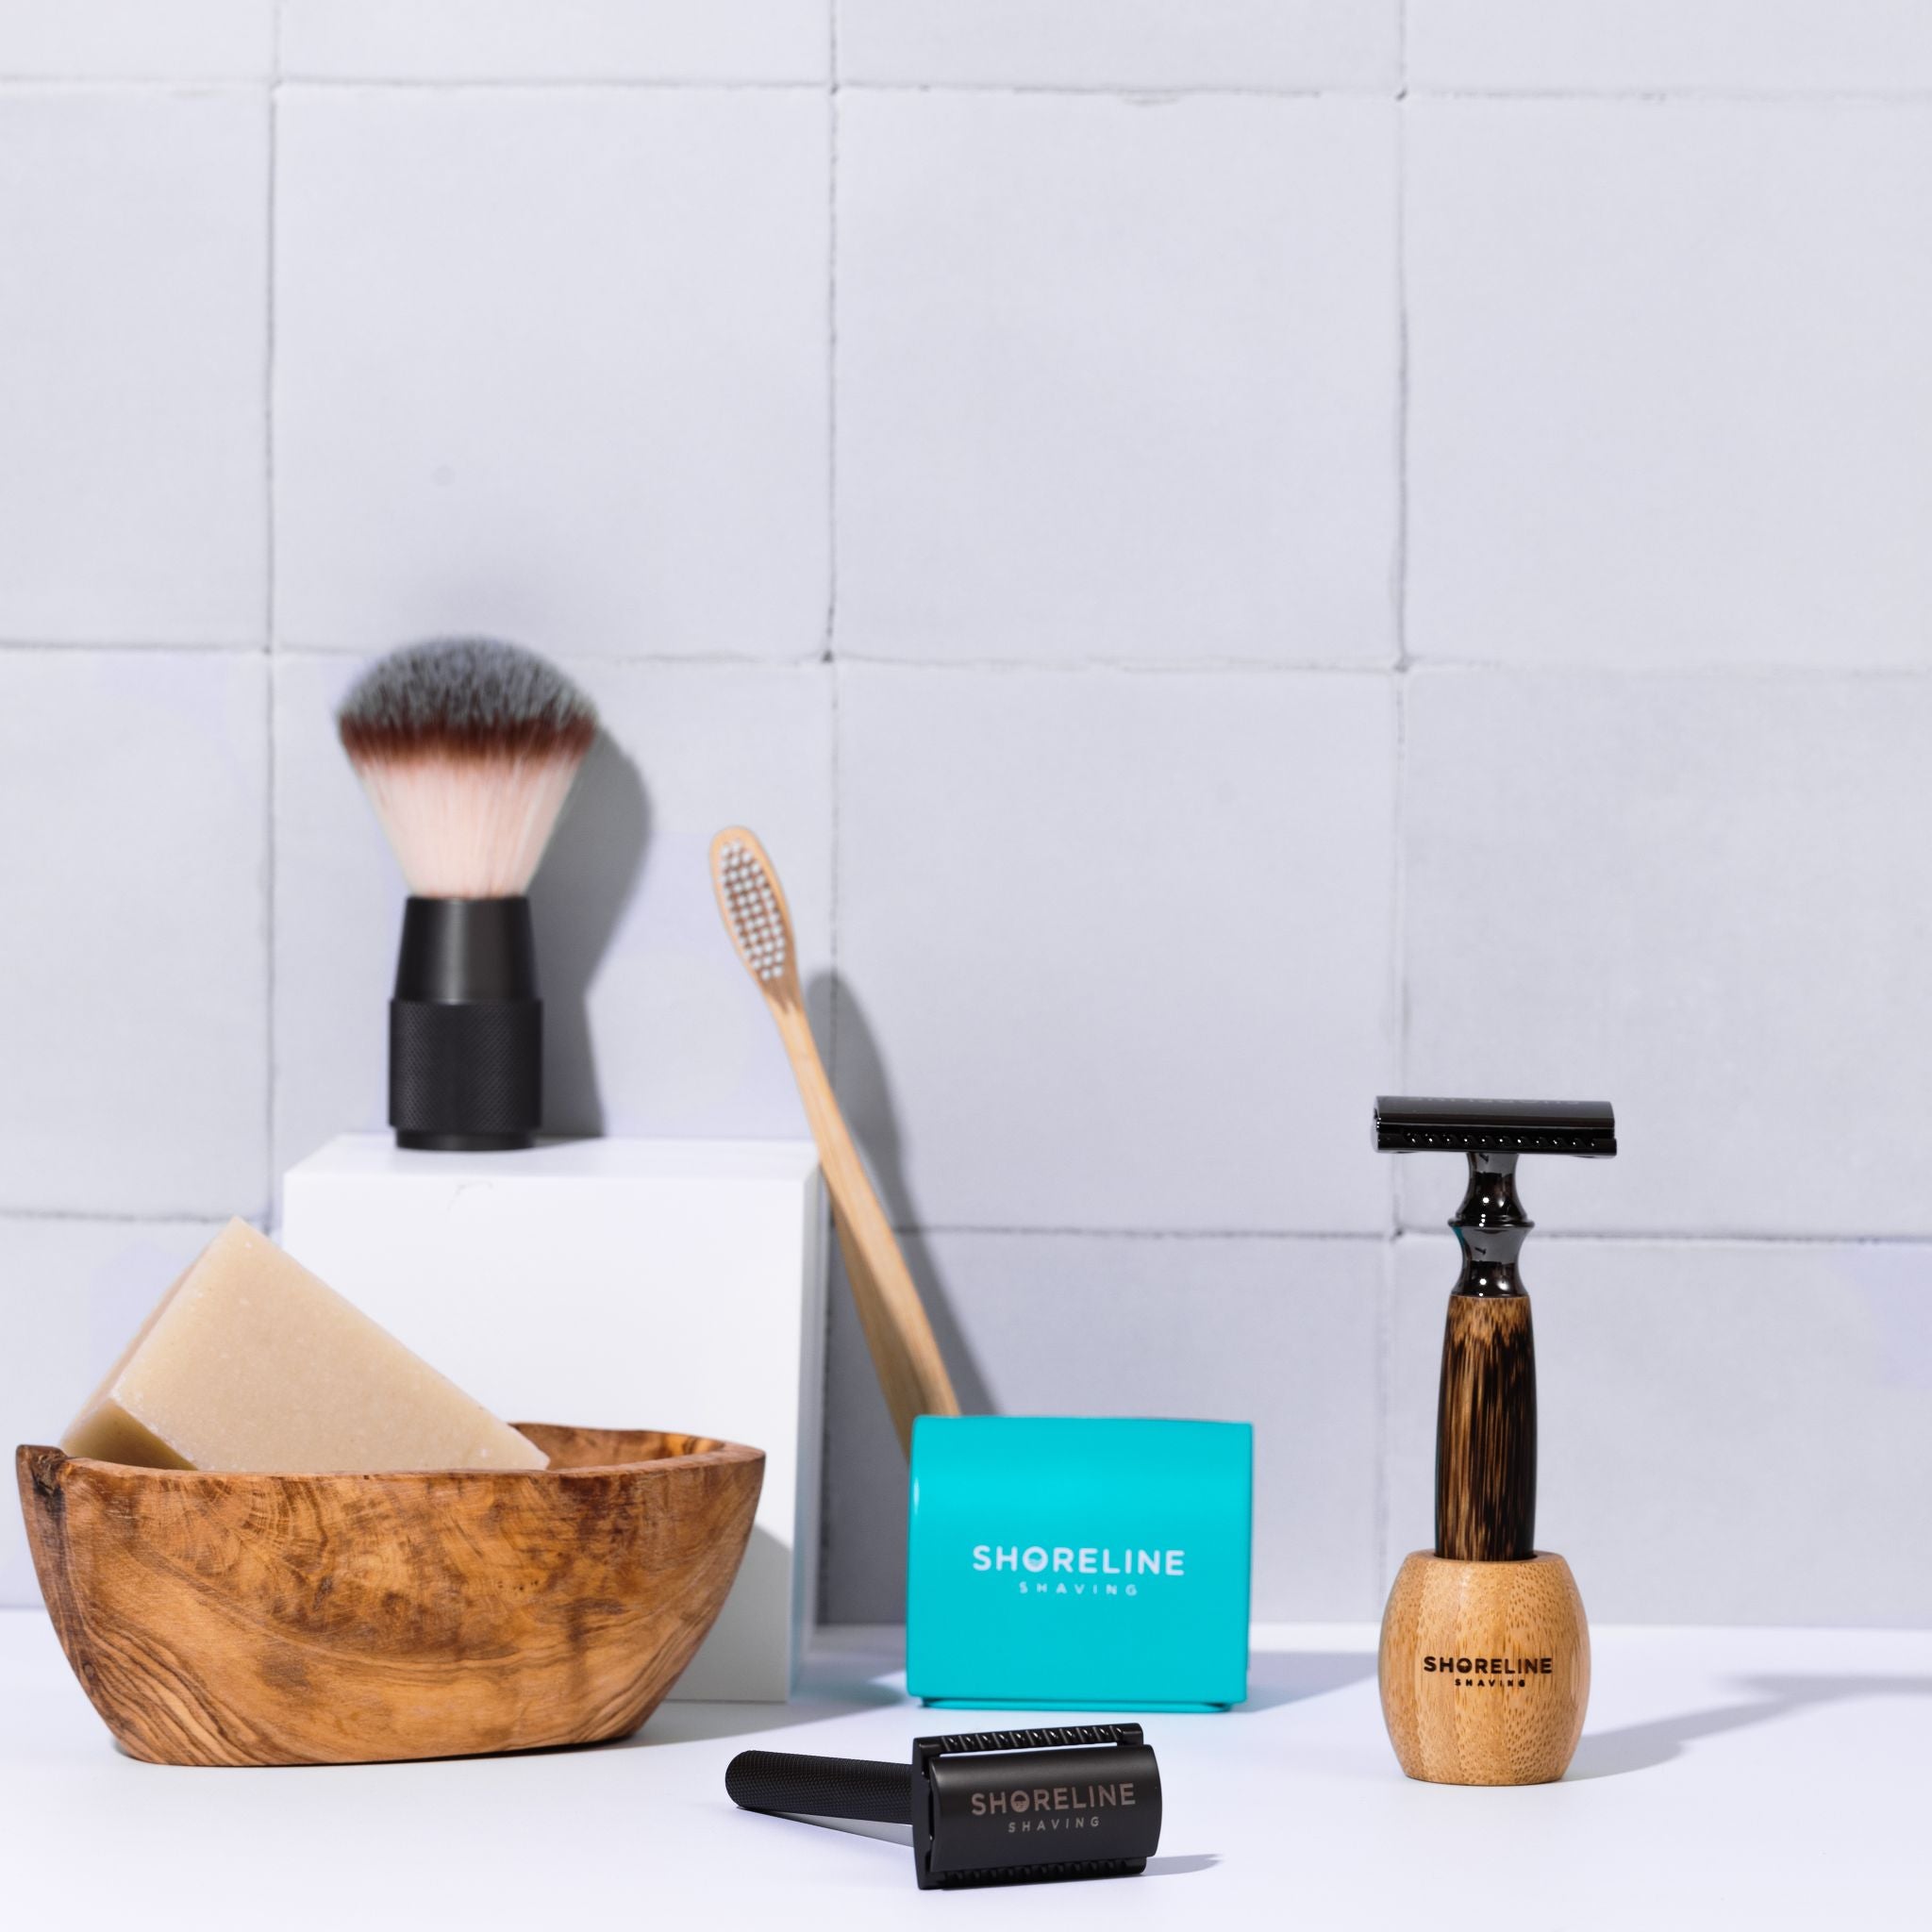 Storm grey bamboo safety razor in matching bamboo stand, surrounded by bathroom accessories including shaving soap, toothbrush and blade tin - Shoreline Shaving